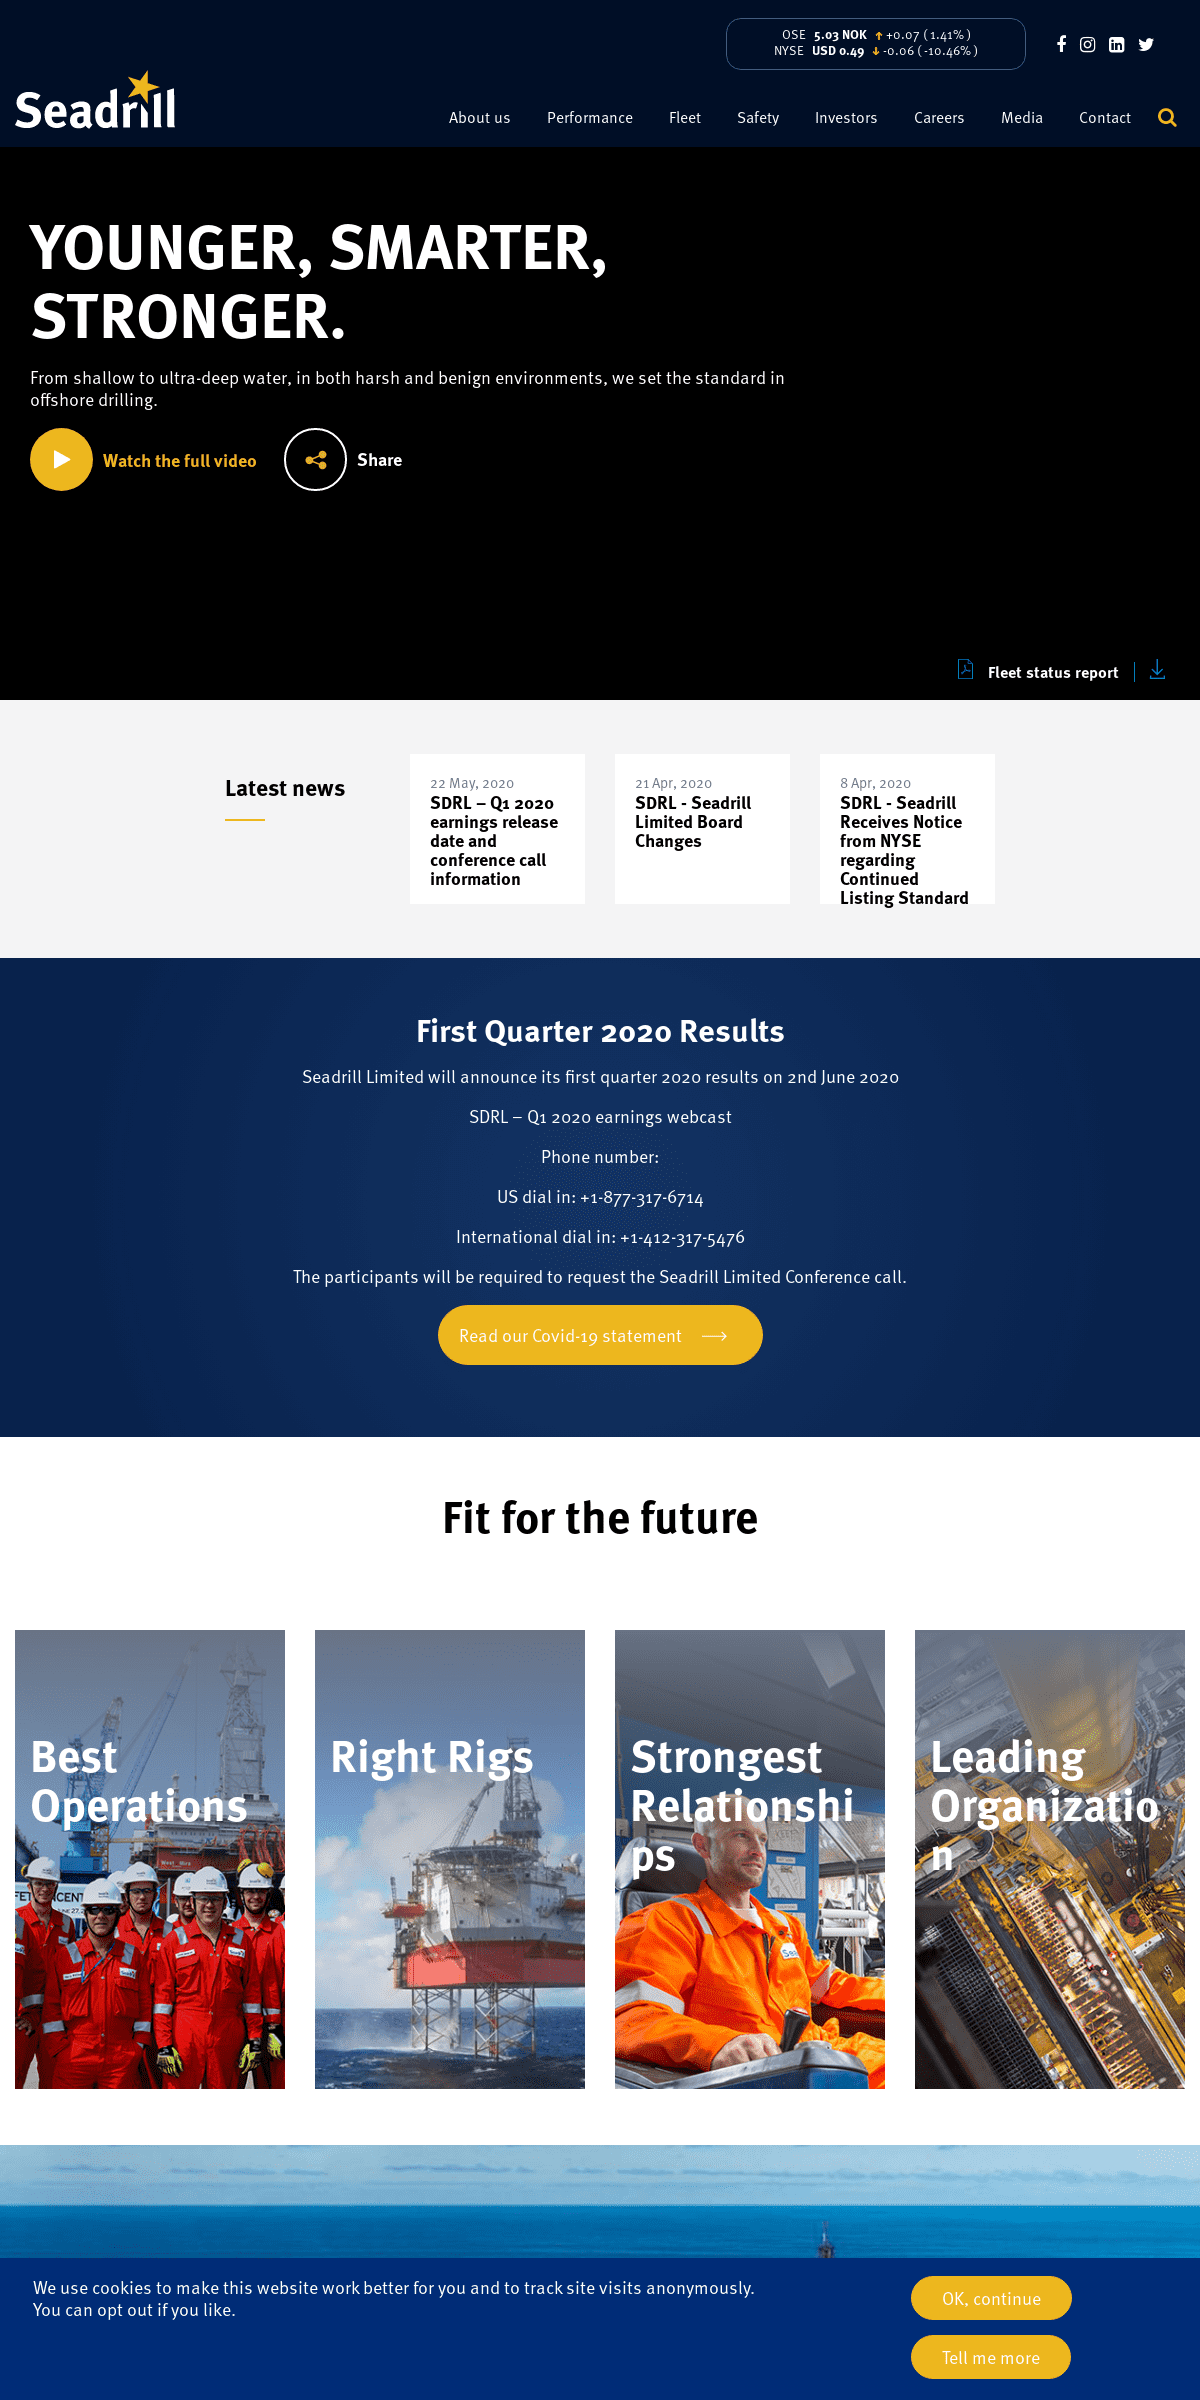 A complete backup of seadrill.com